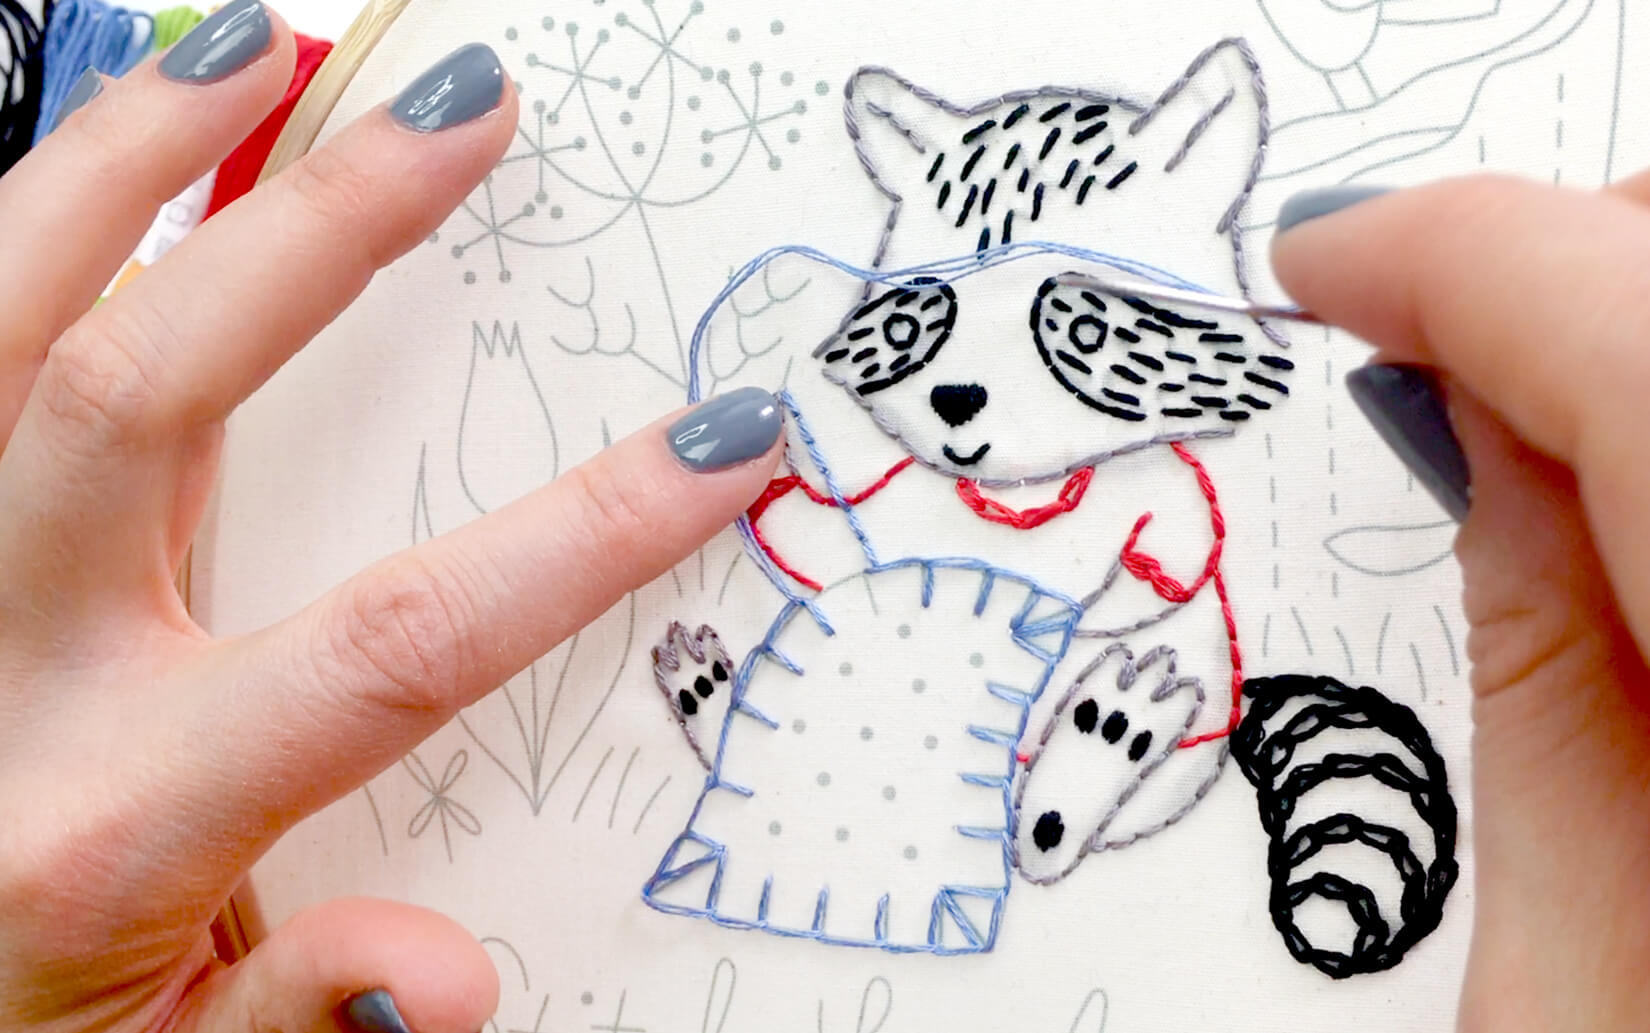 Stitching Raccoon Sampler embroidery kit